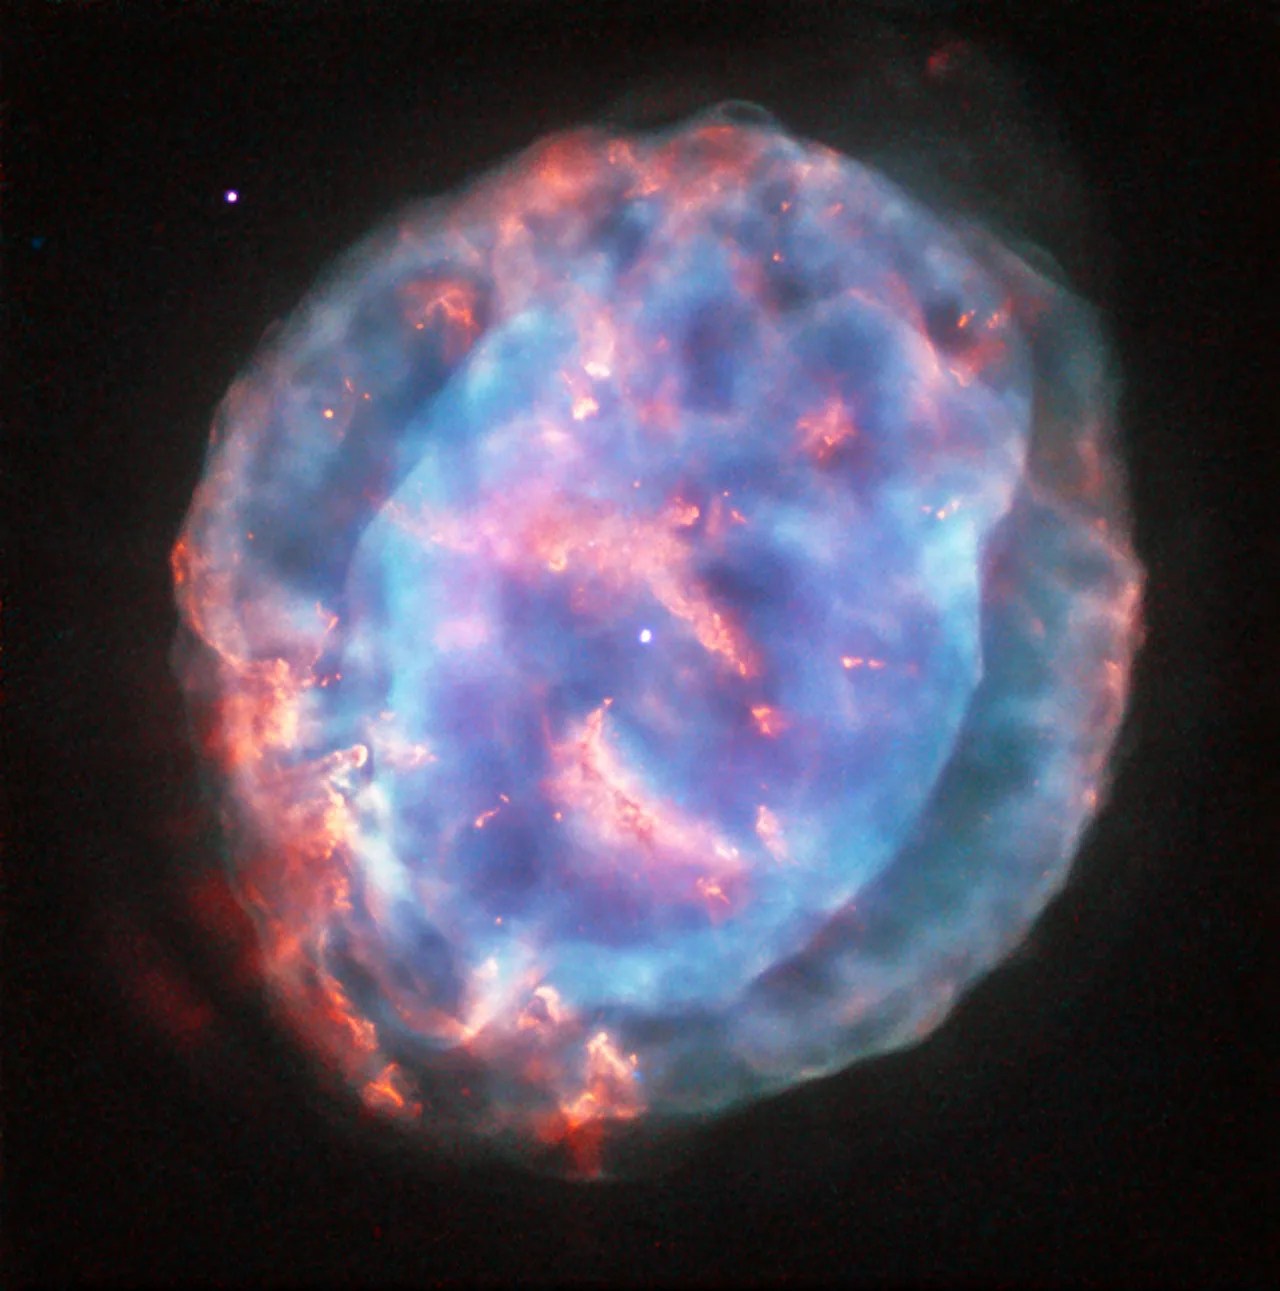 The colorful bubble against the black sky is planetary nebula ngc 6818